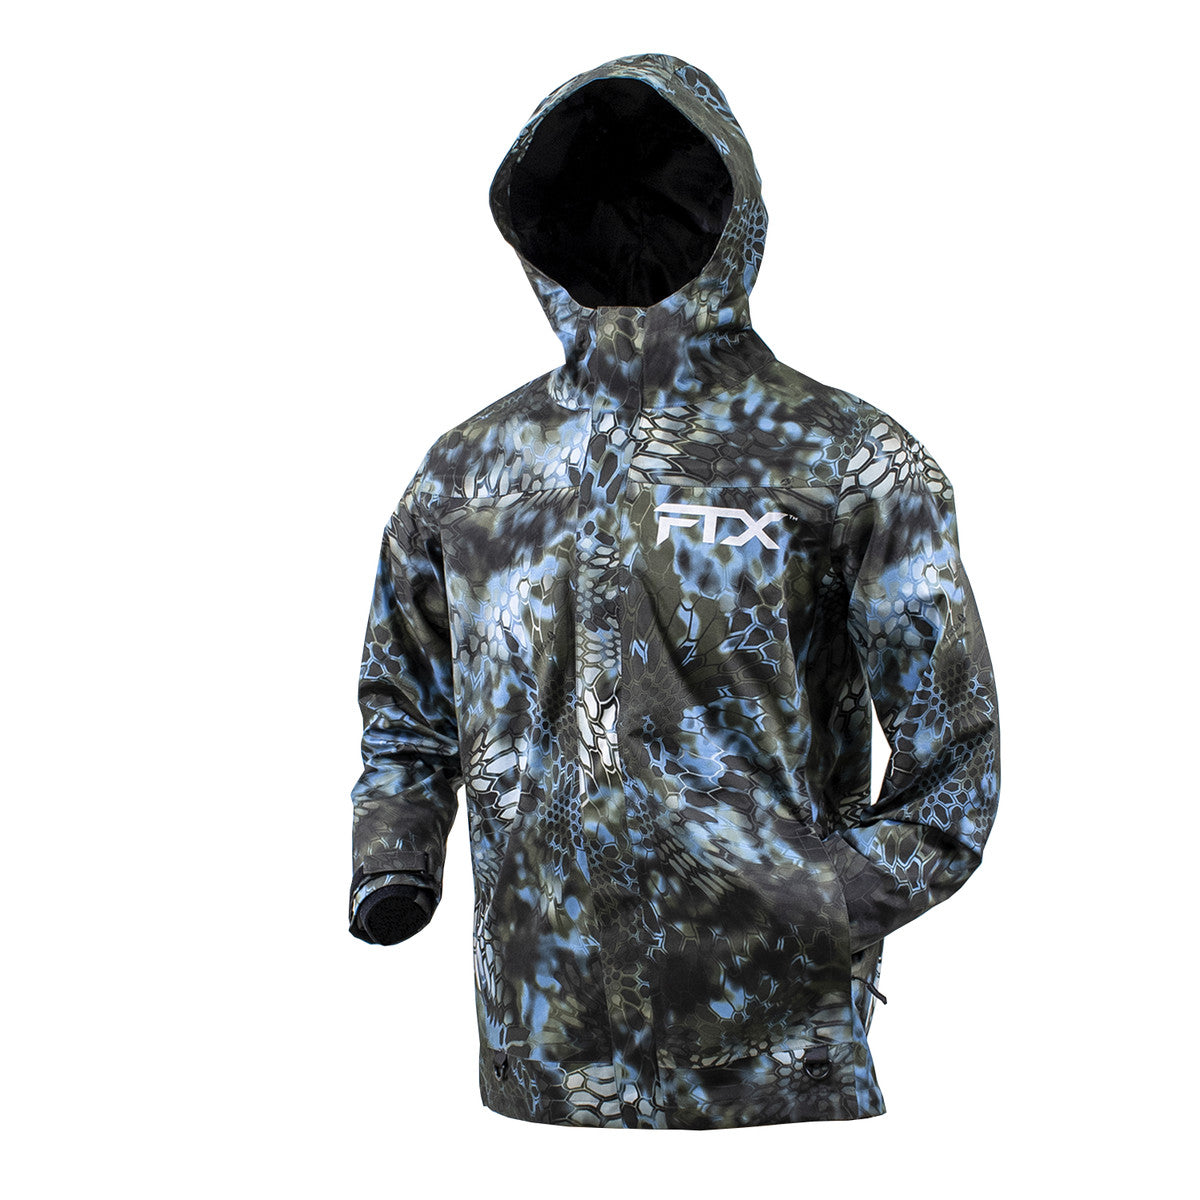 FROGG TOGGS FTX ARMOR JACKET